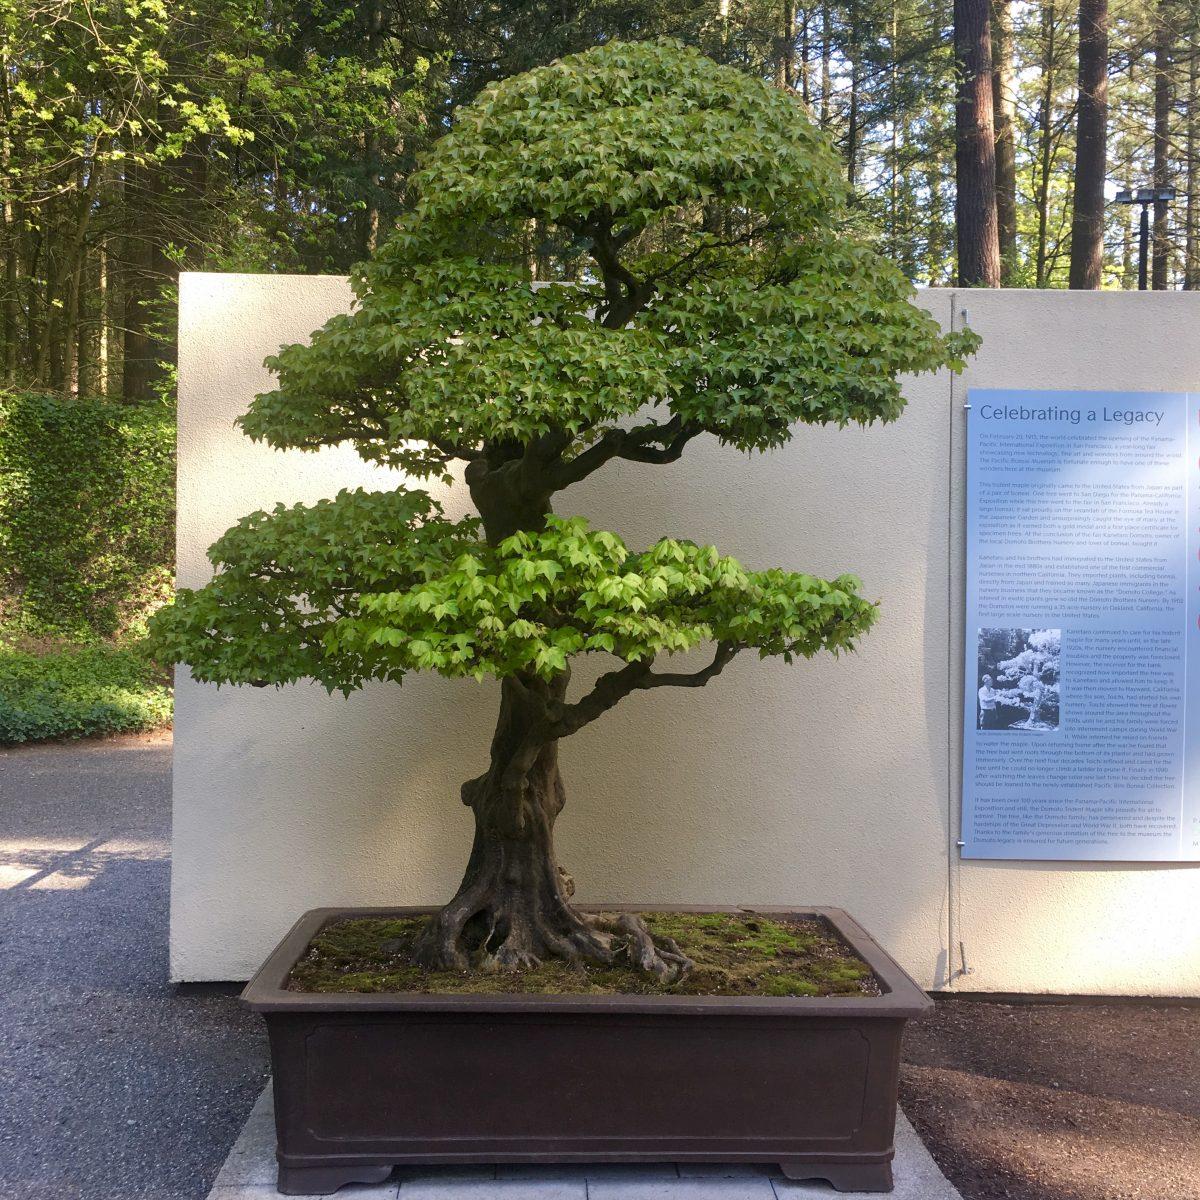 “Domoto Maple, Summer” (Trident Maple, Acer buergerianum), in training as a bonsai since at least 1913. Artist: Toichi Domoto. (Courtesy of Pacific Bonsai Museum)